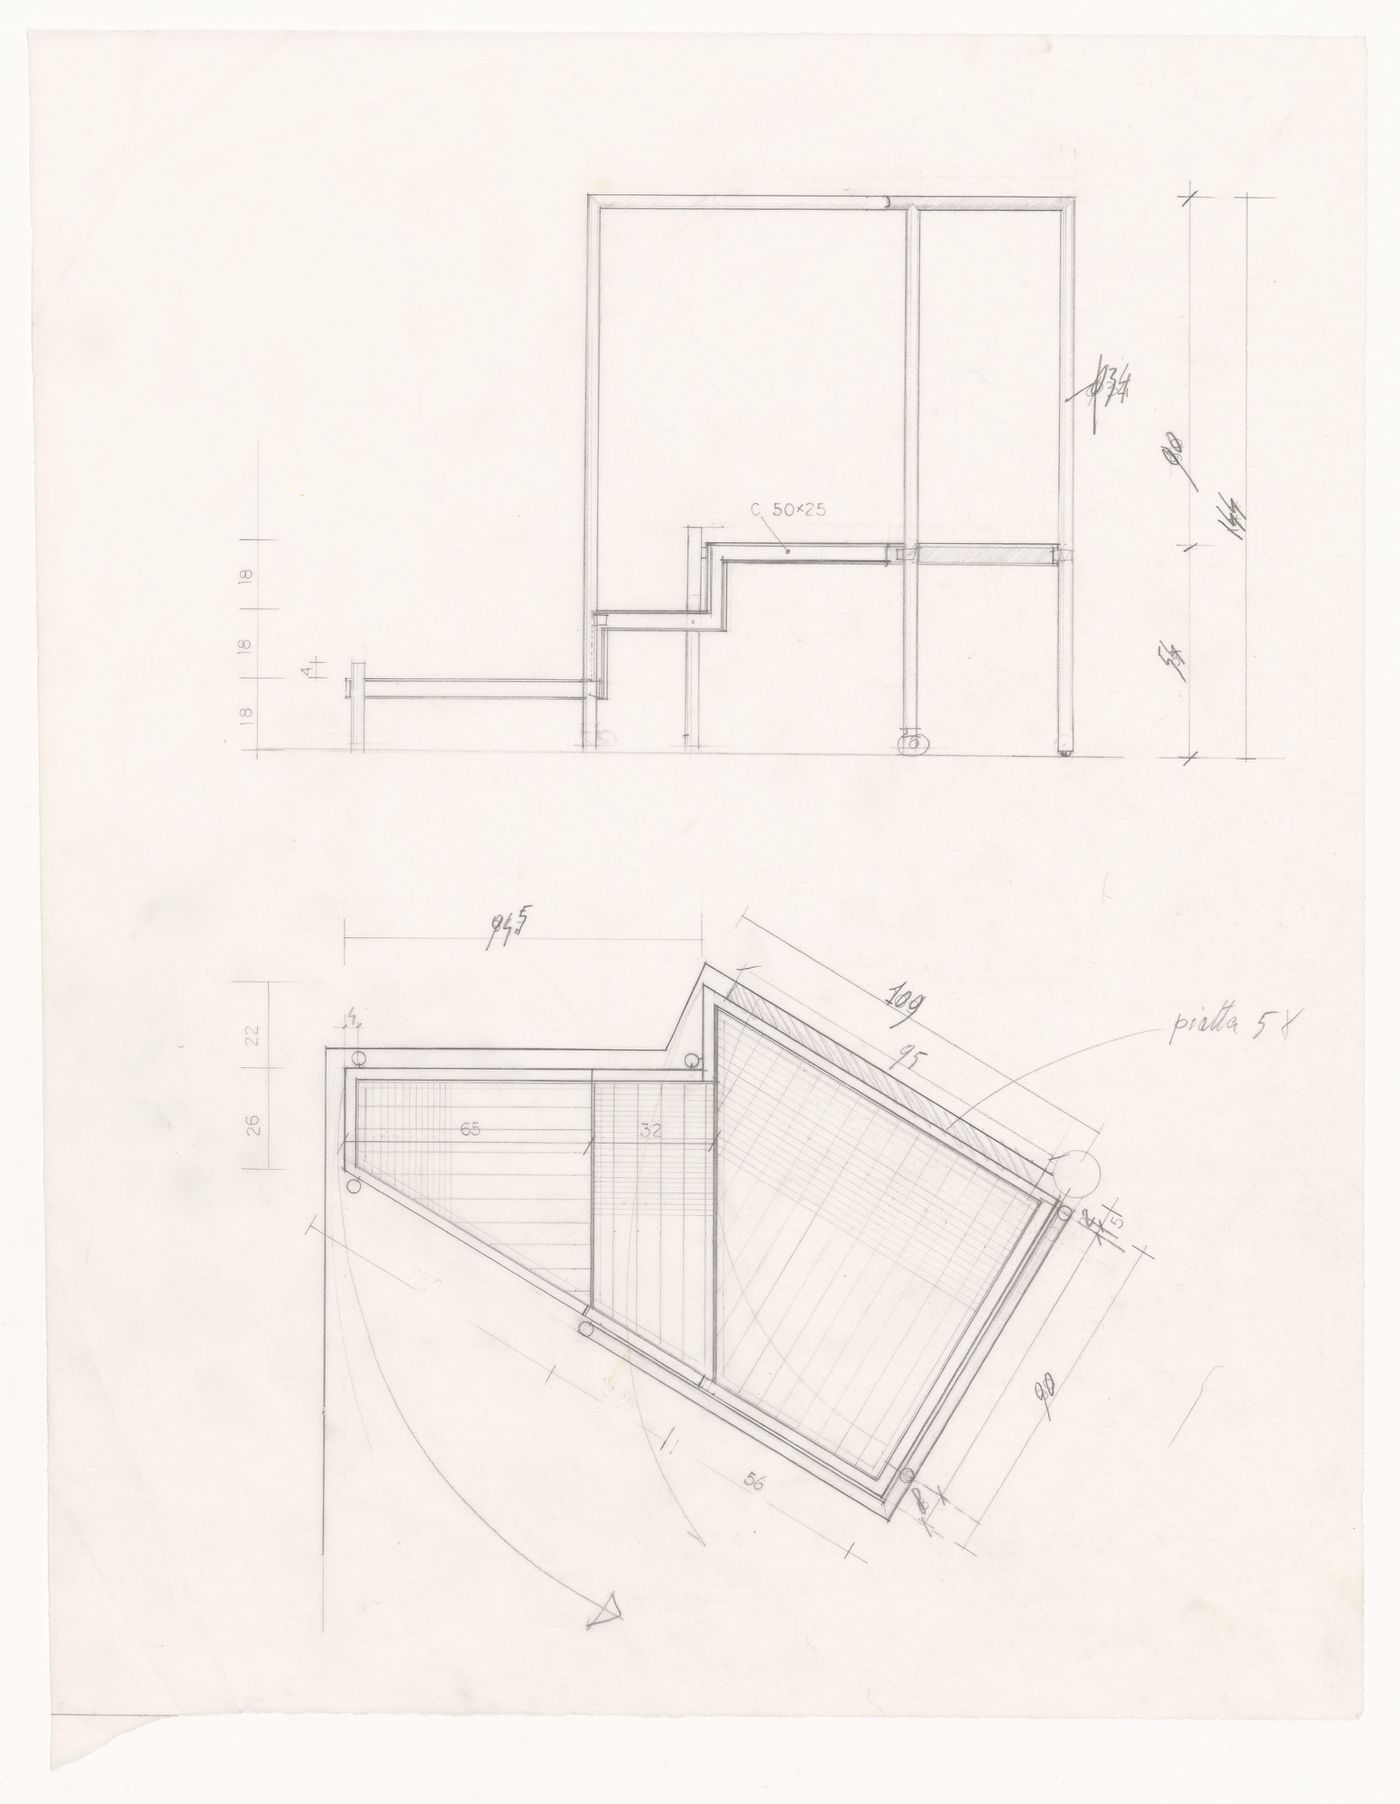 Sections and plan for Casa Frea, Milan, Italy